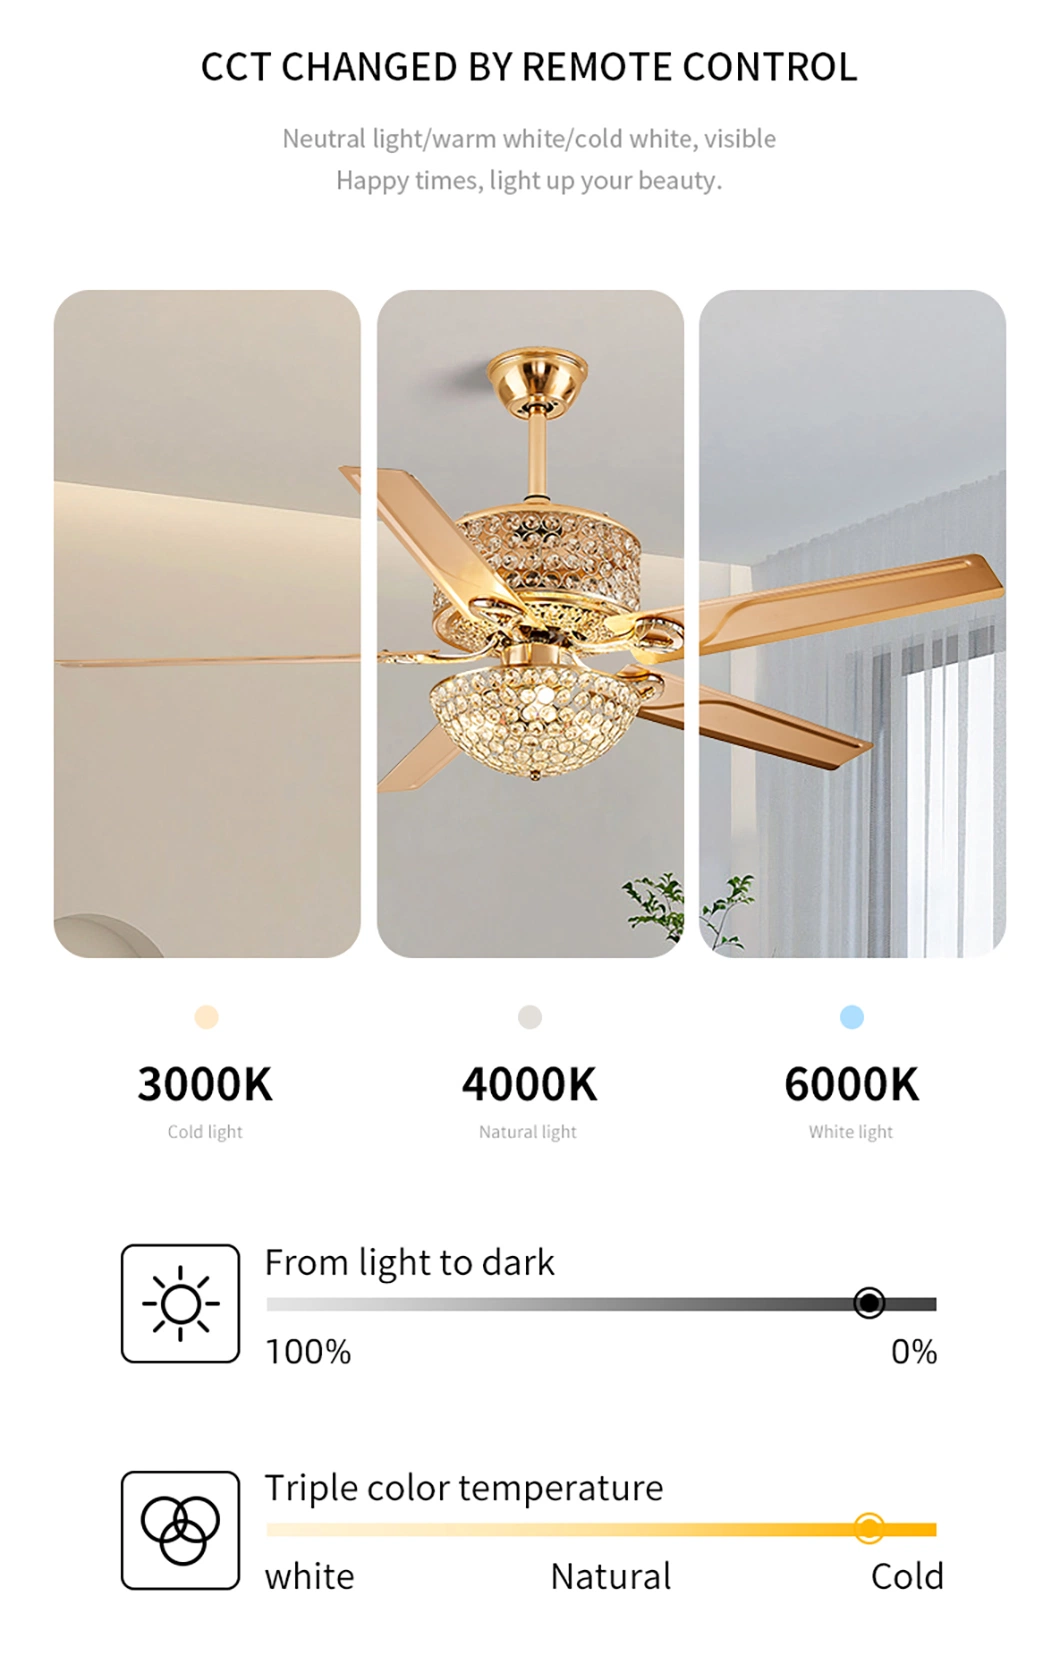 Luxury Crystal Fan with Indoor Lower Noise Intelligent Remote Control Ceiling Light